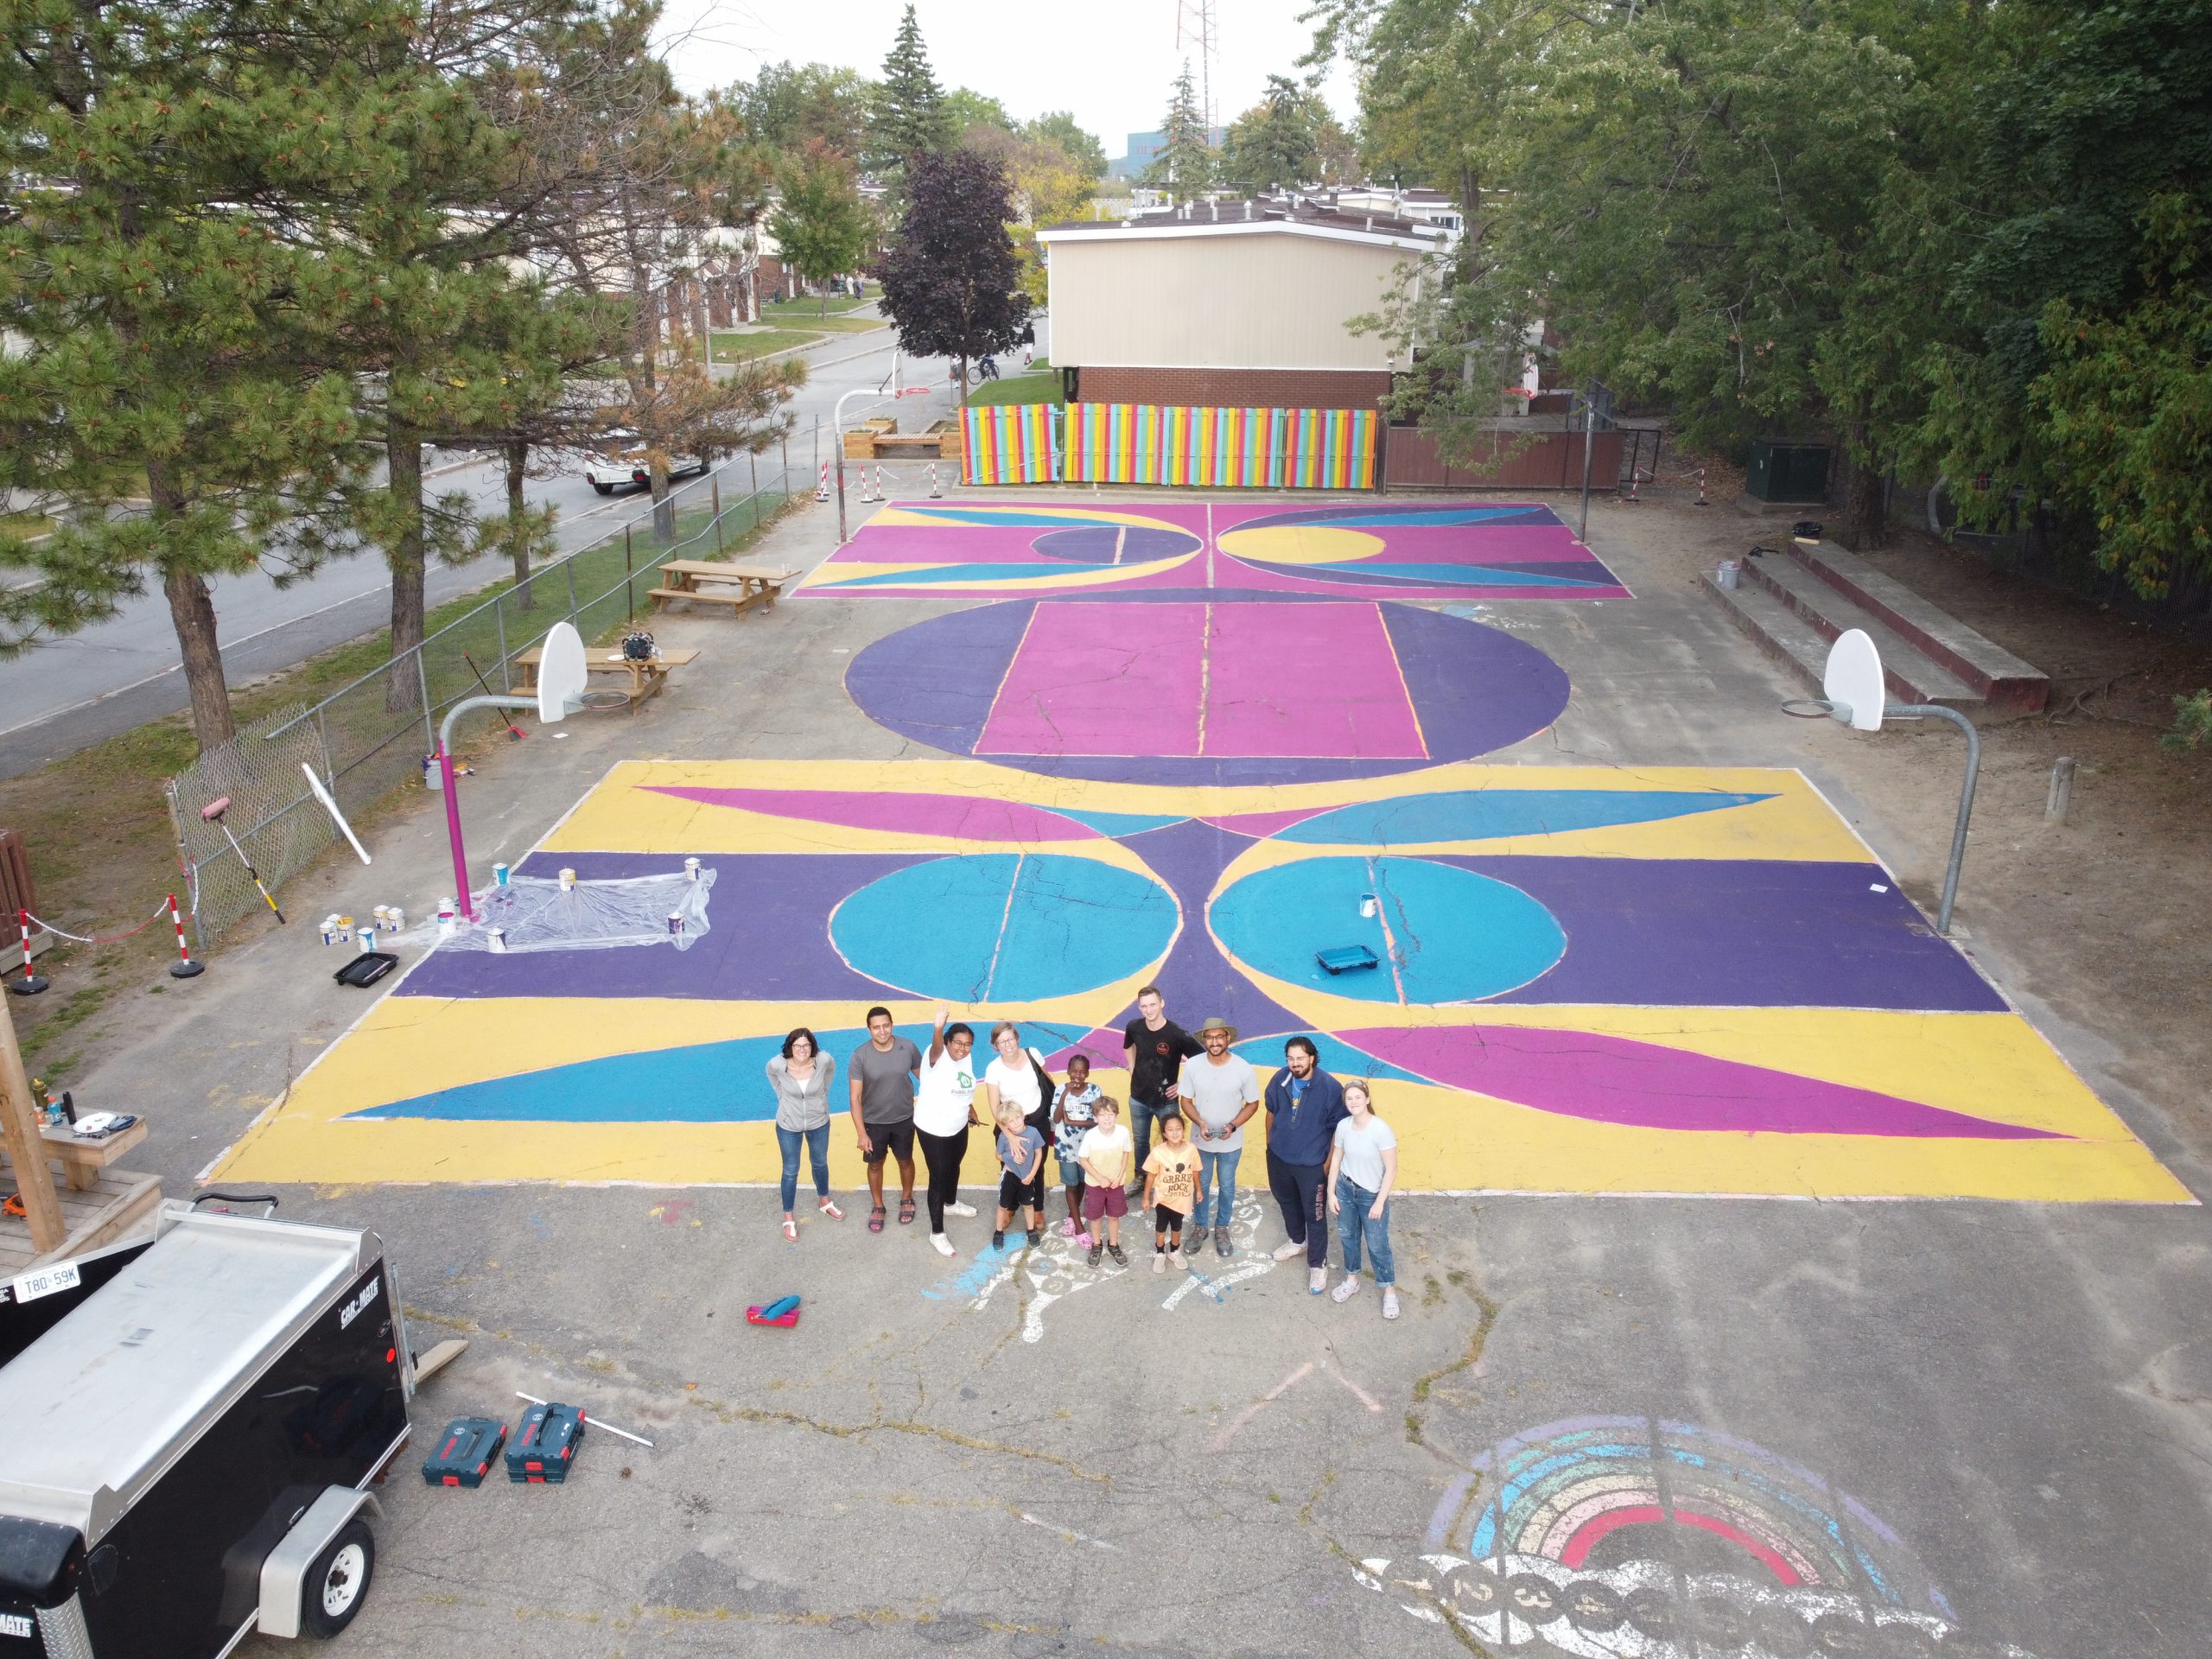 A group of people standing on a colorfully painted basketball court.